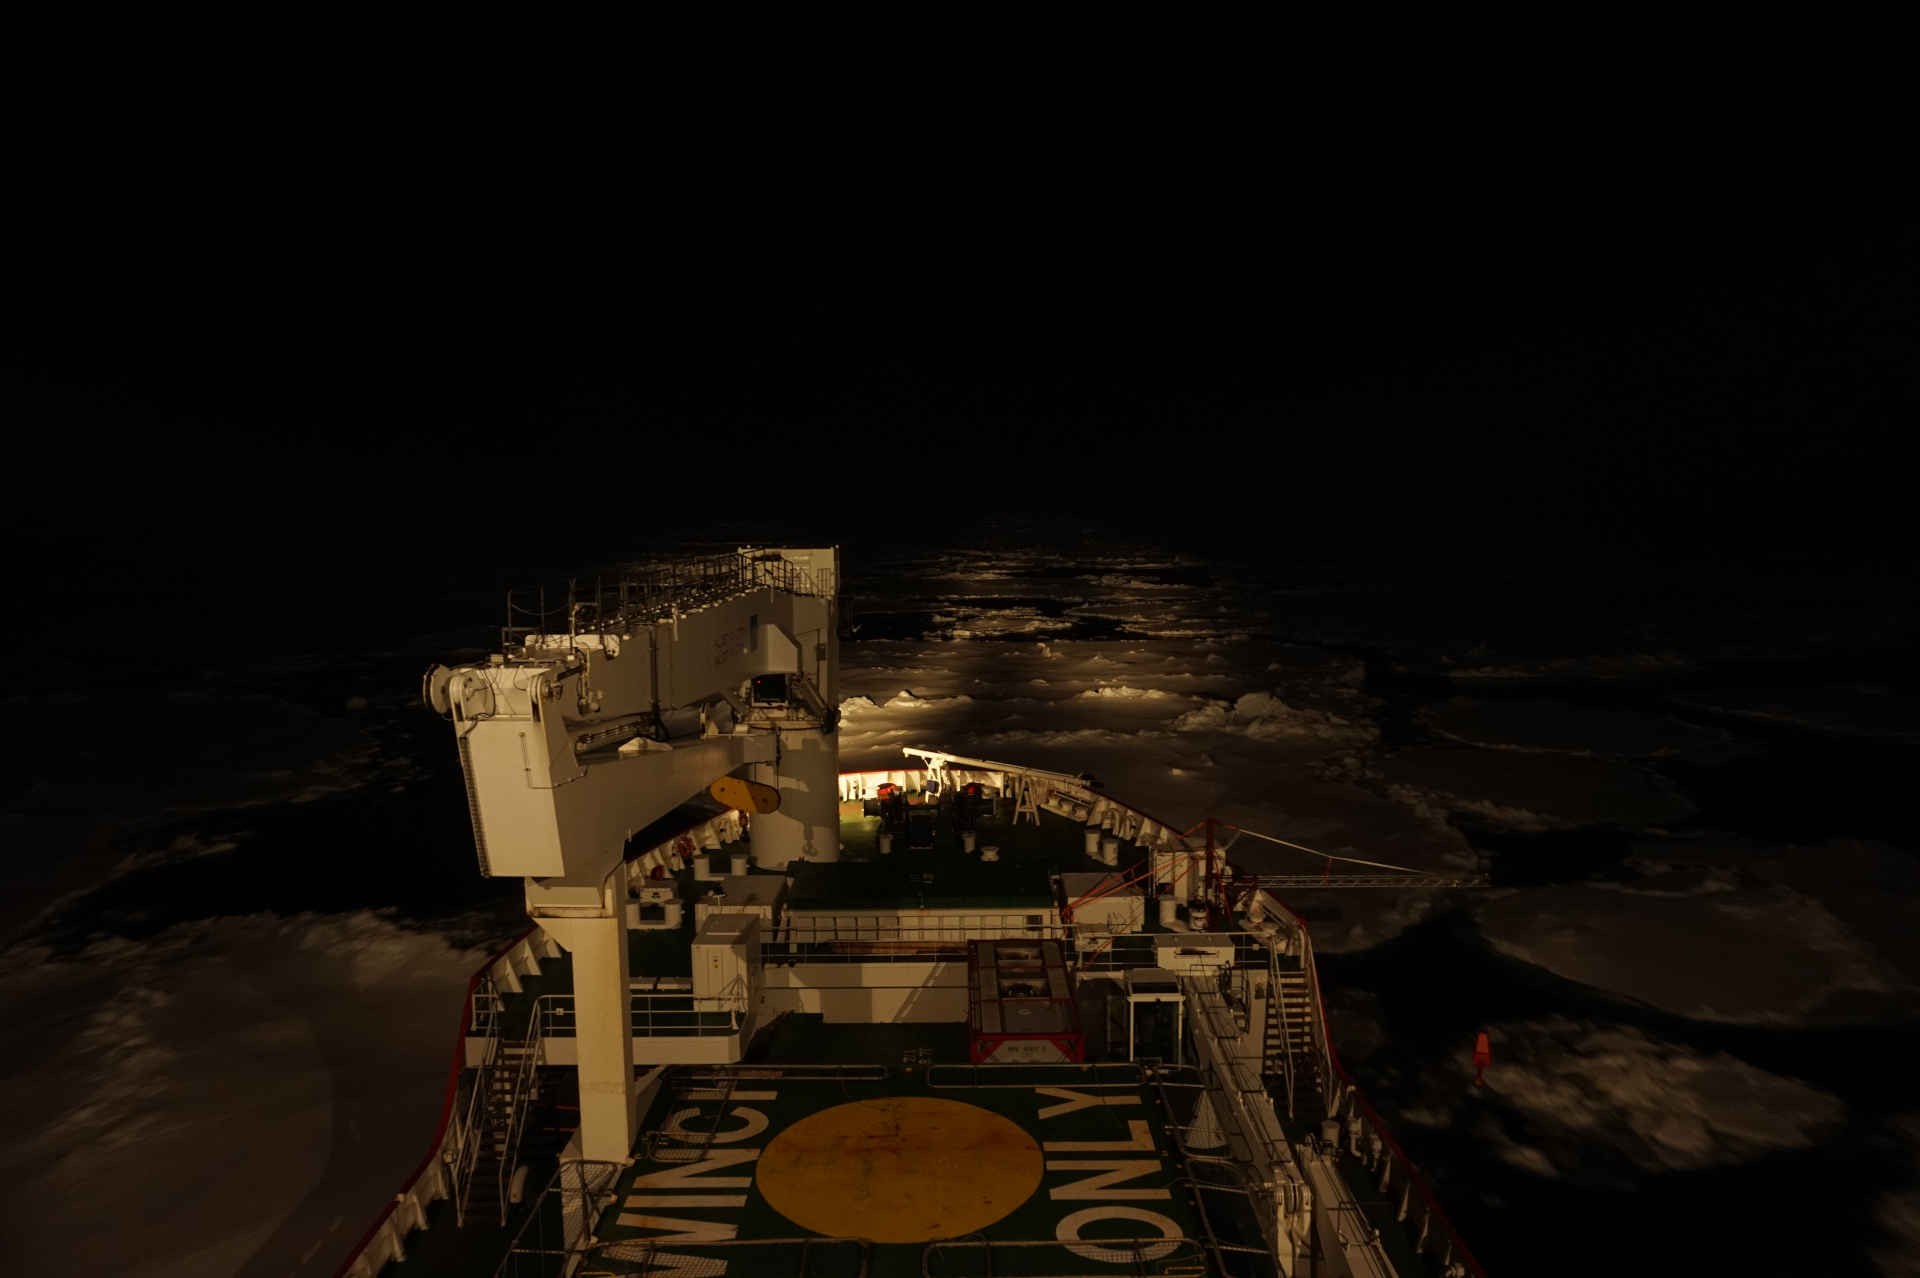 On the 'S.A. Agulhas II' at night